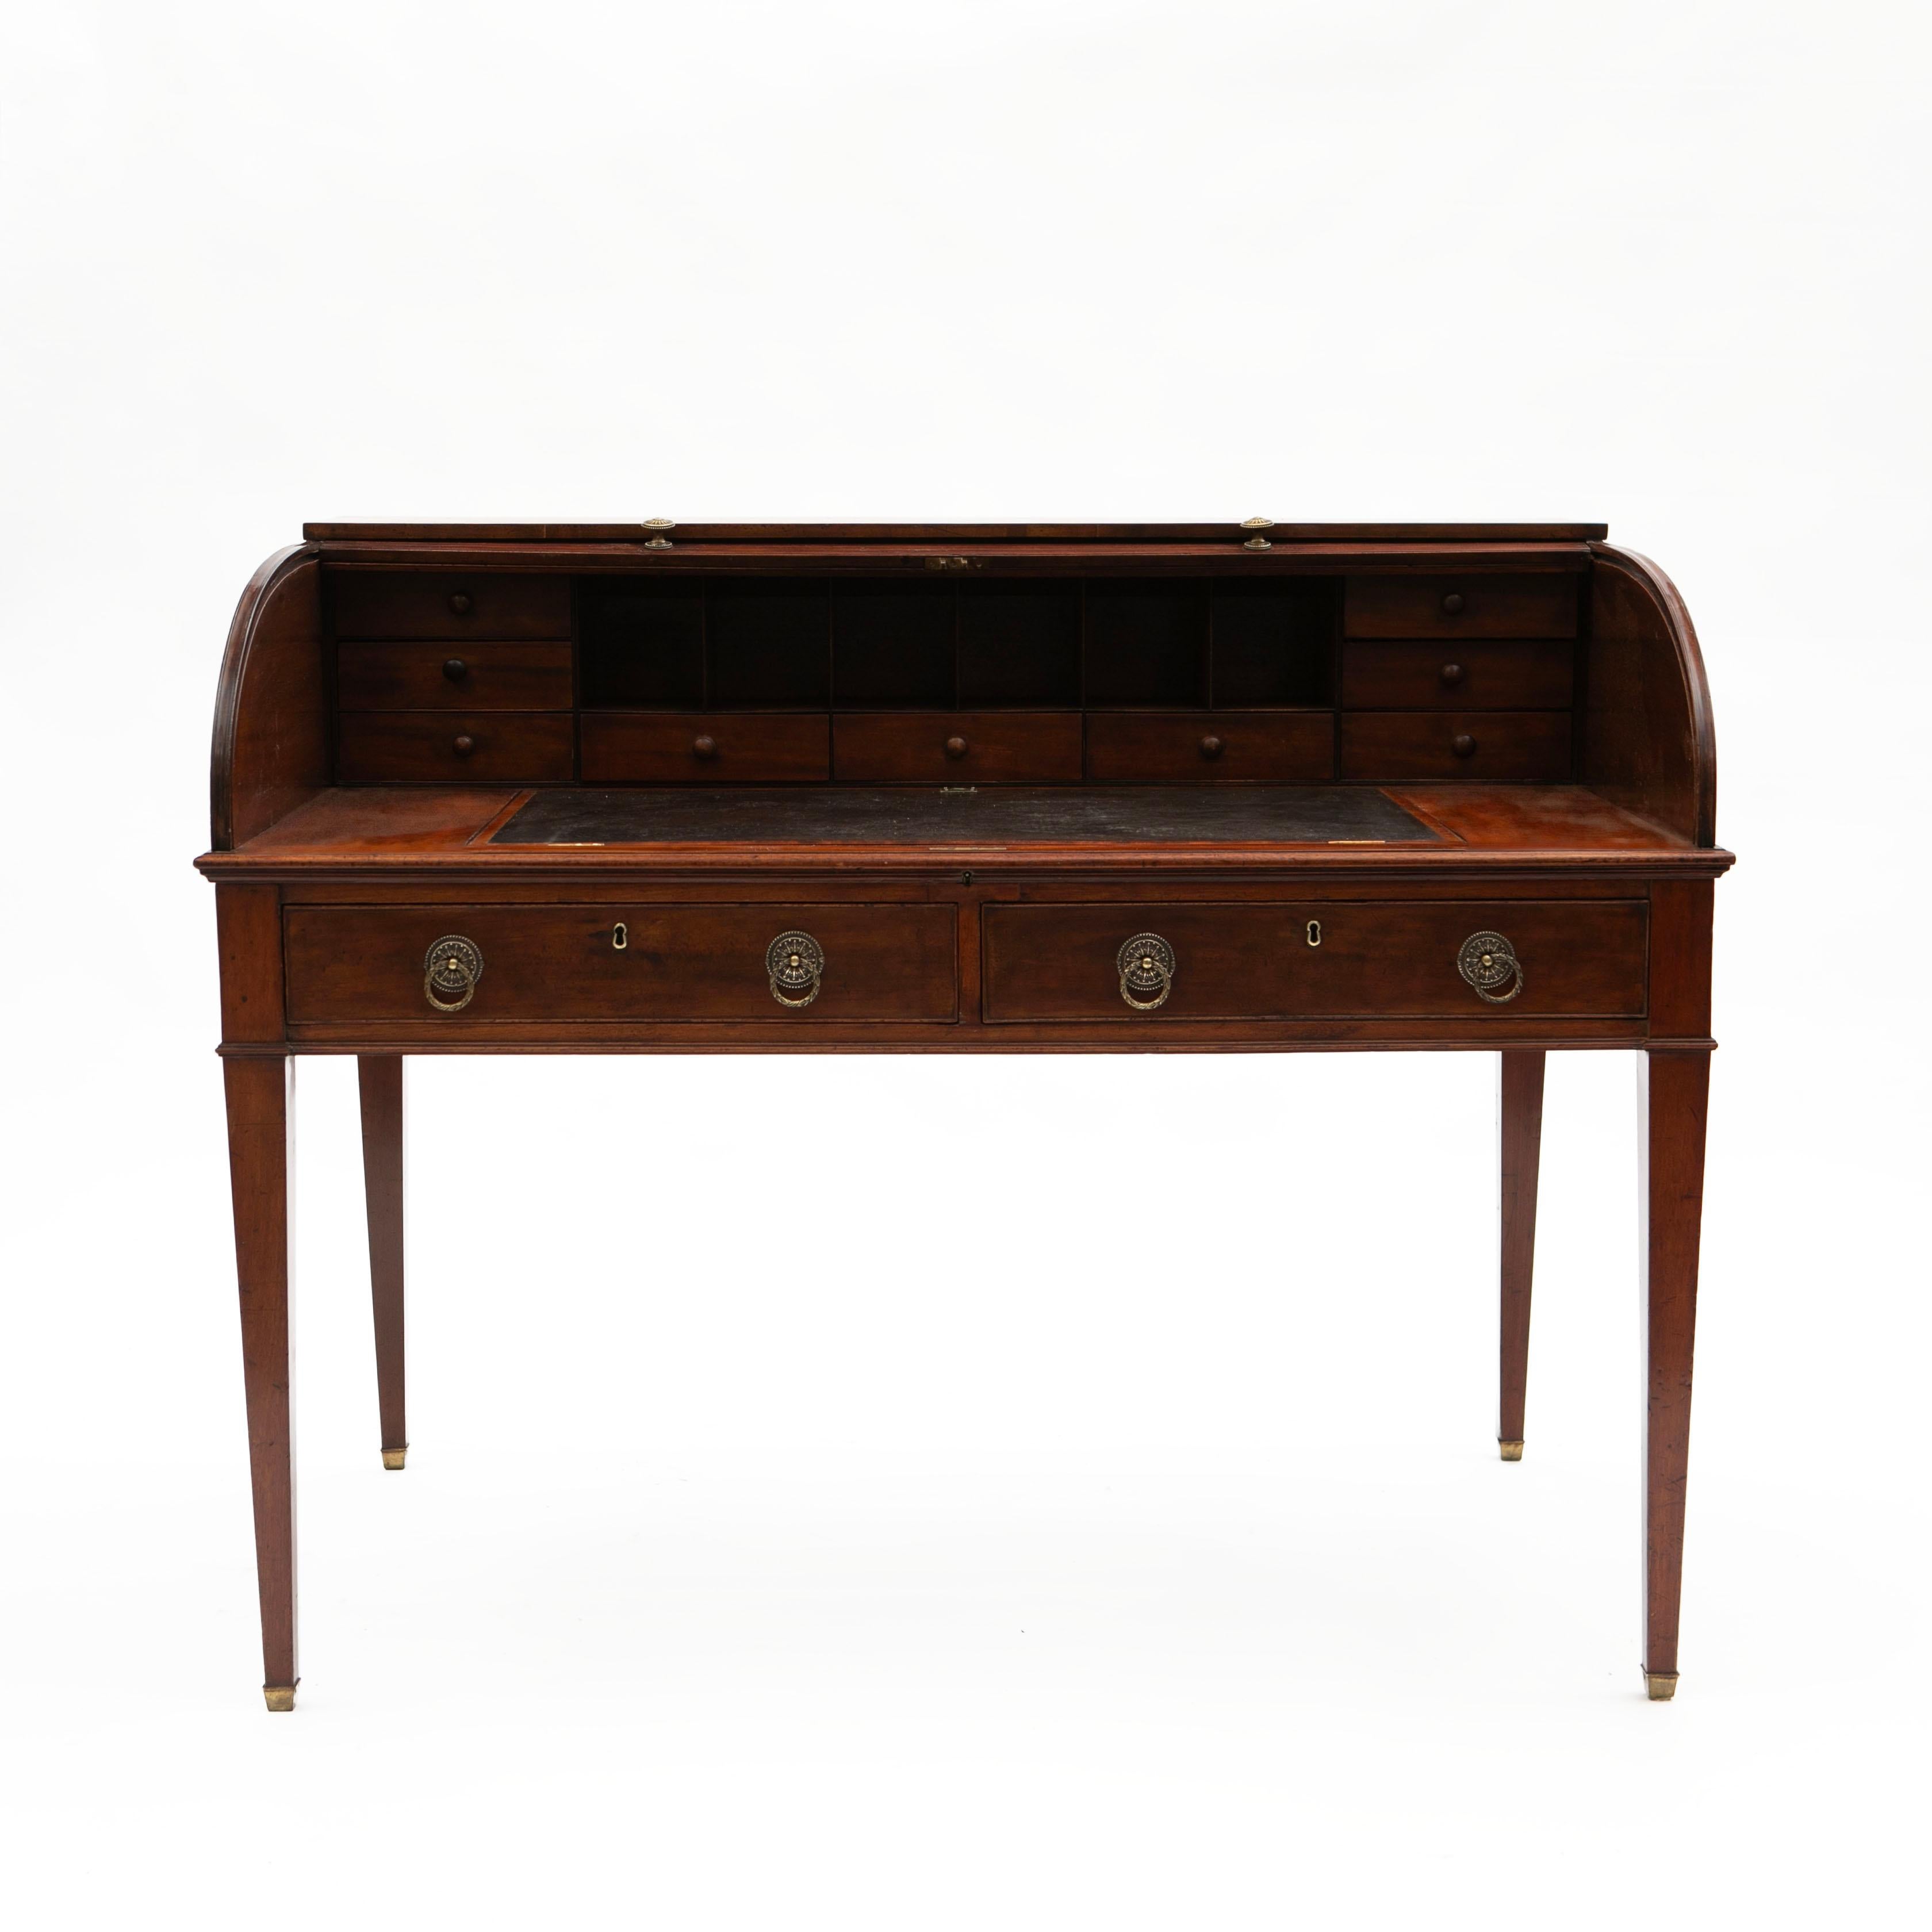 Free Standing English Regency Tambour Roll Top Writing Desk In Good Condition For Sale In Kastrup, DK